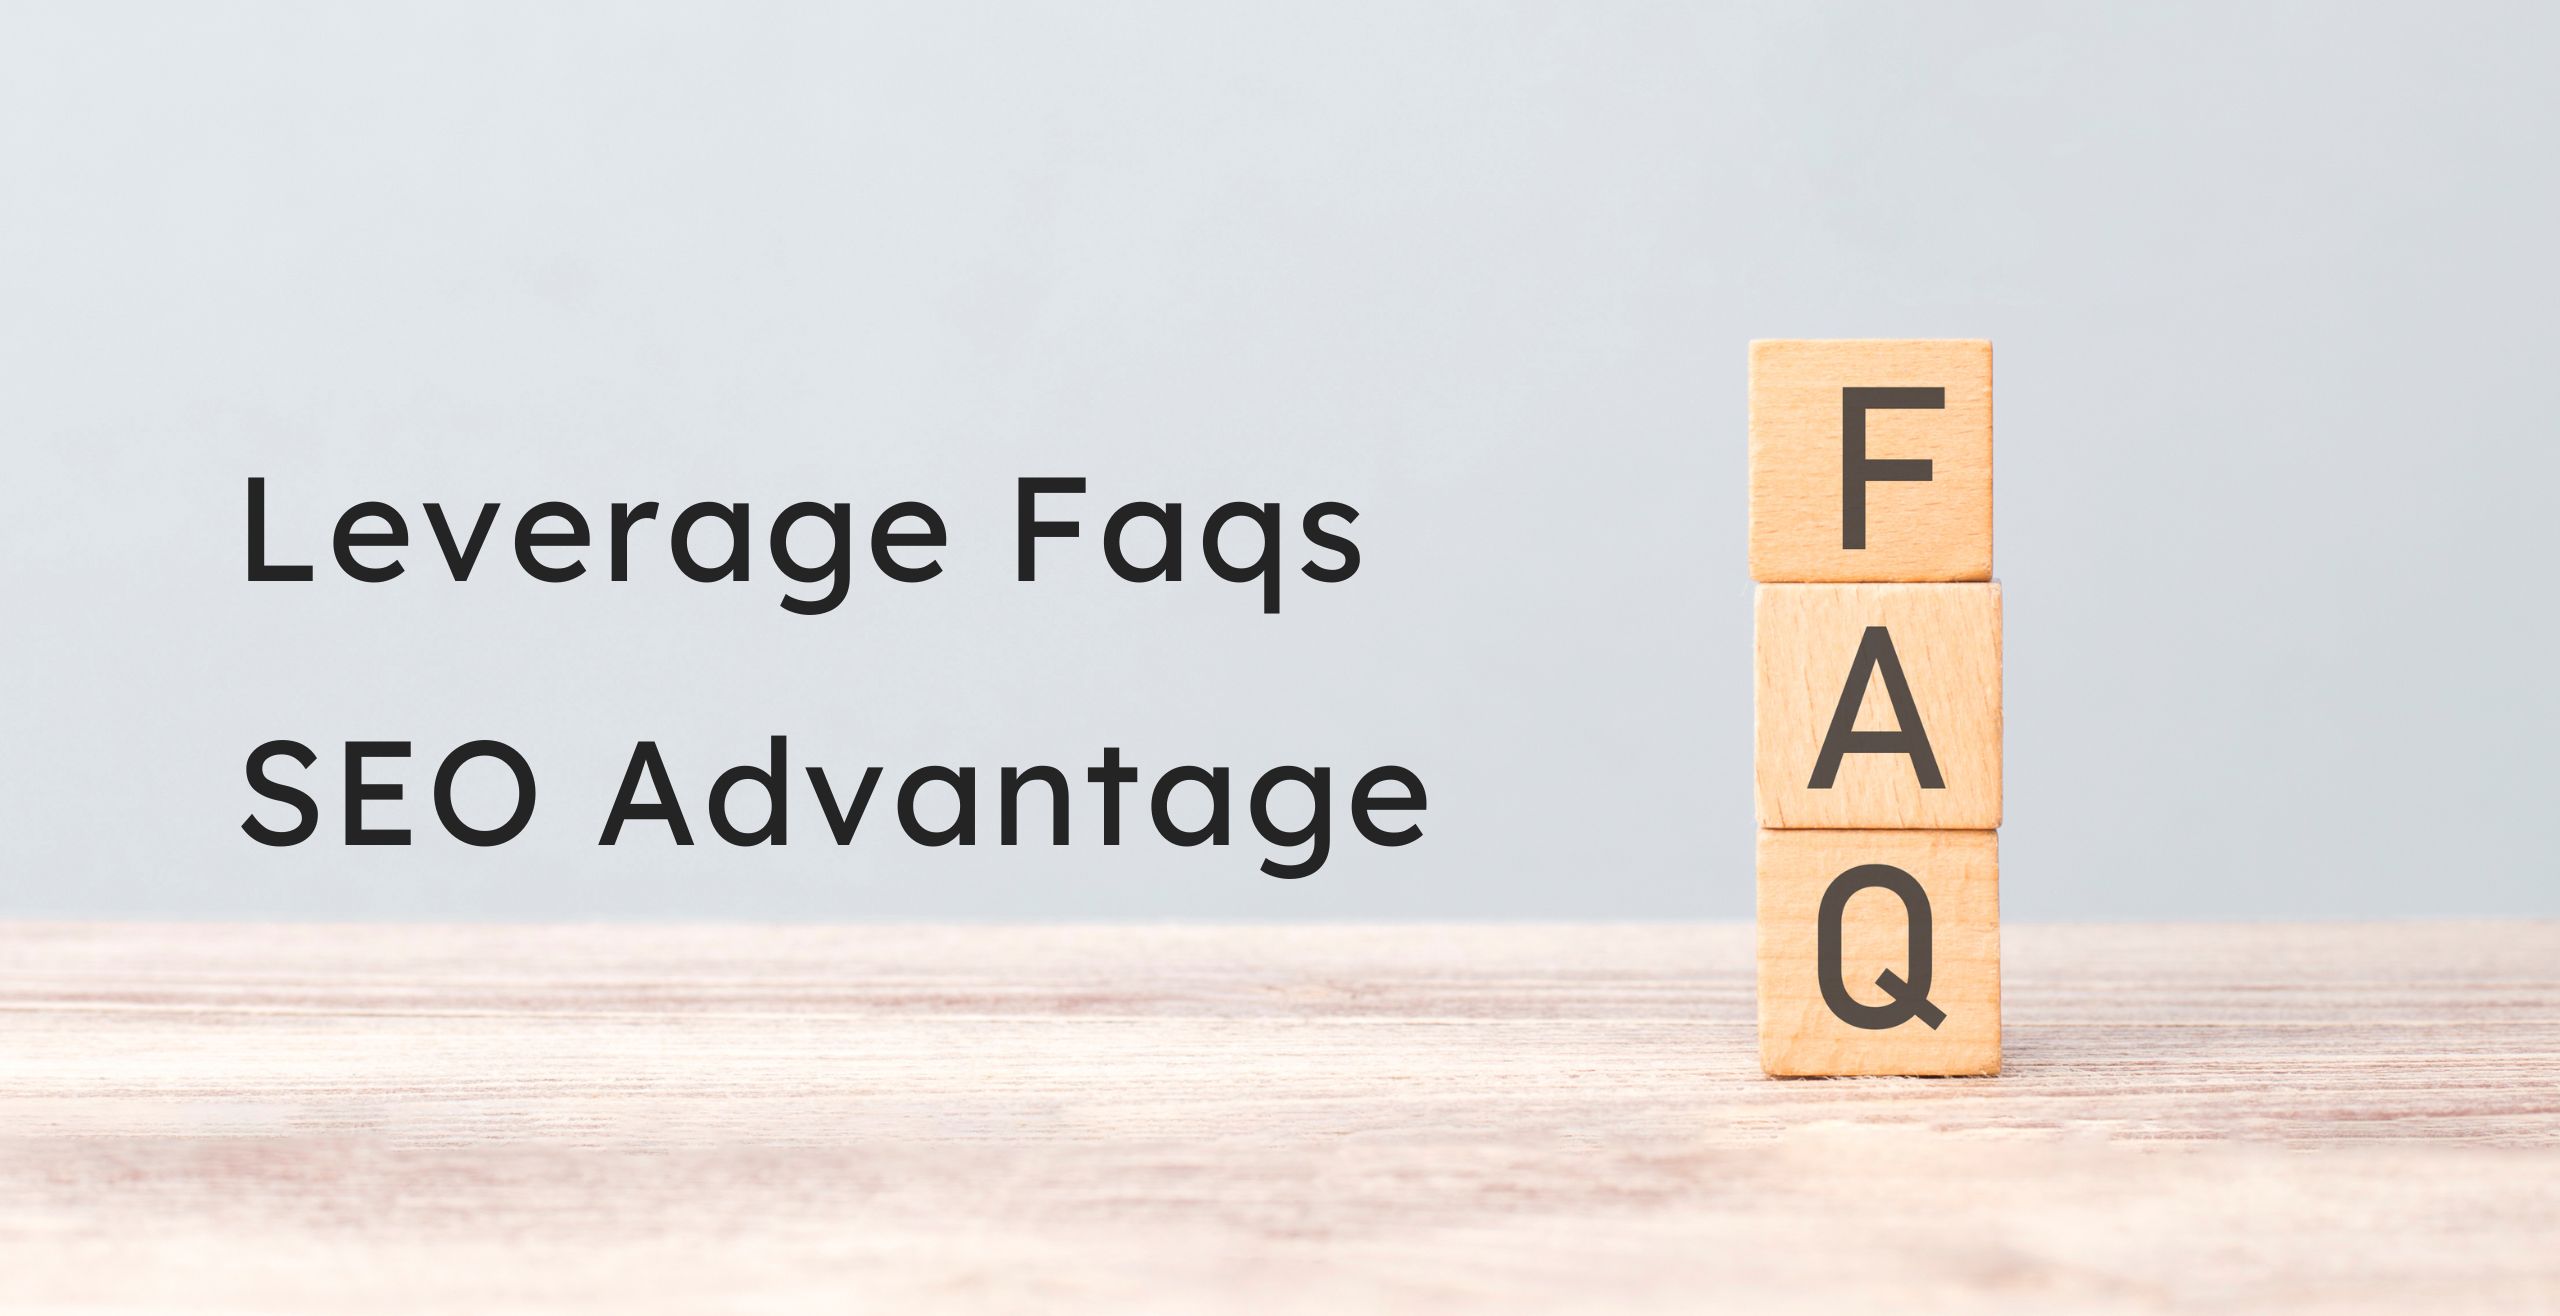 Why are FAQs Important for SEO?